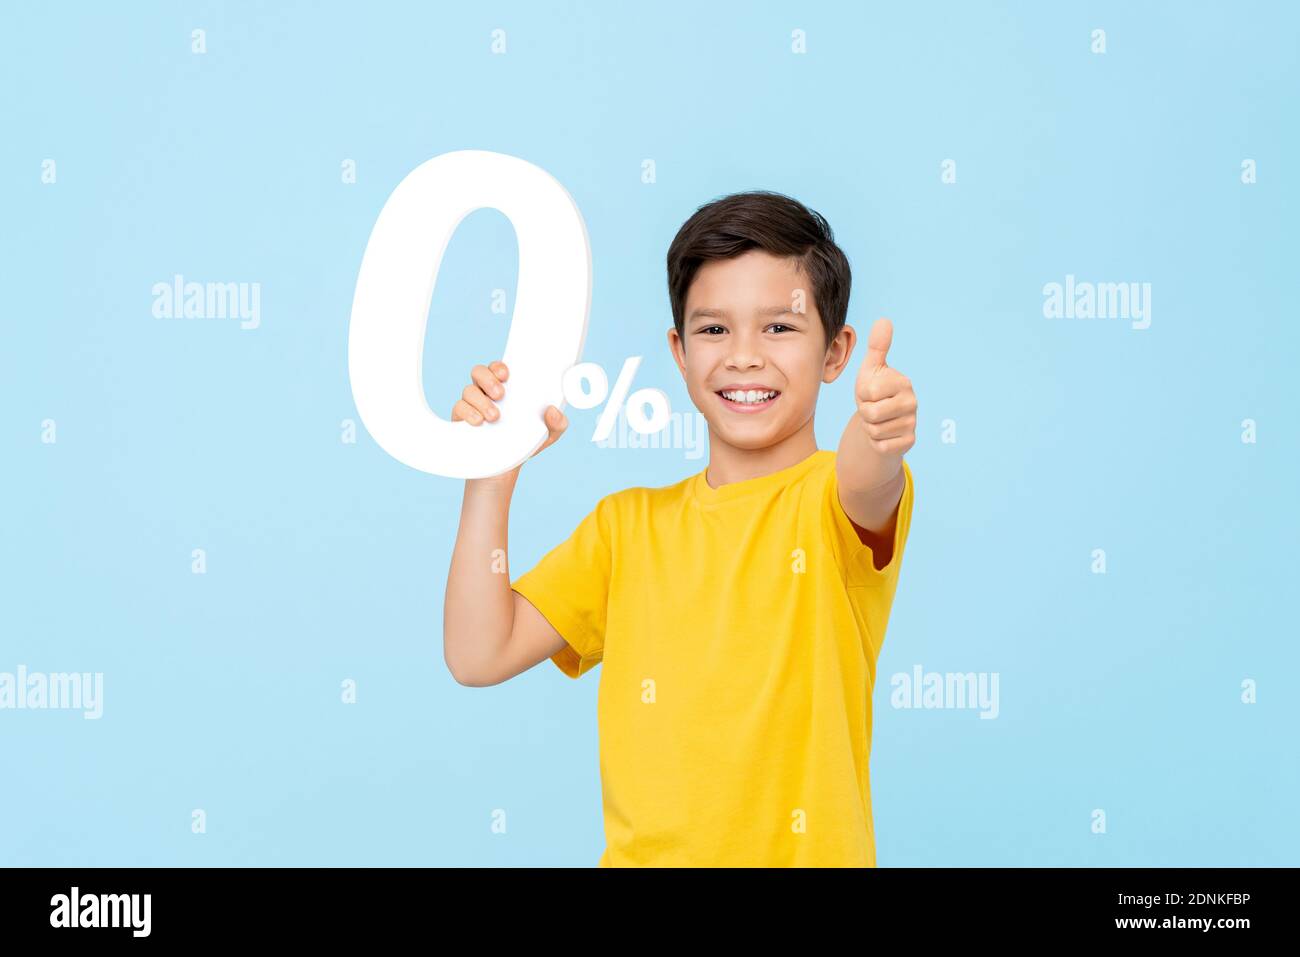 Smiling happy 10 years old mixed race boy holding 0% cutout and giving thumbs up isolated on light blue studio background Stock Photo